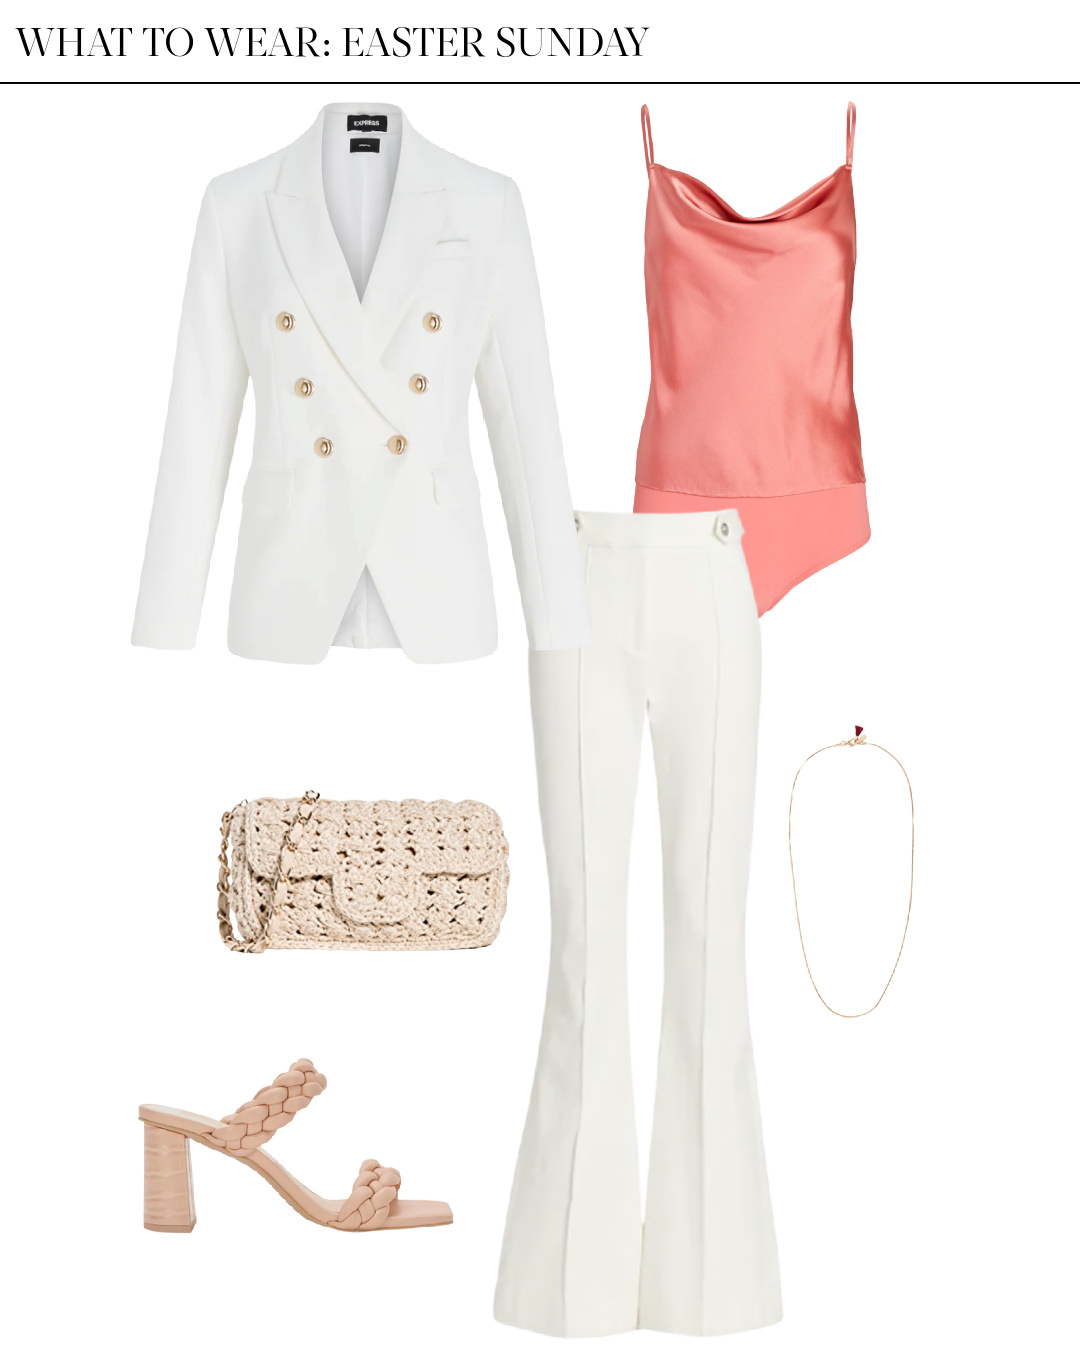 dressy easter outfit ideas